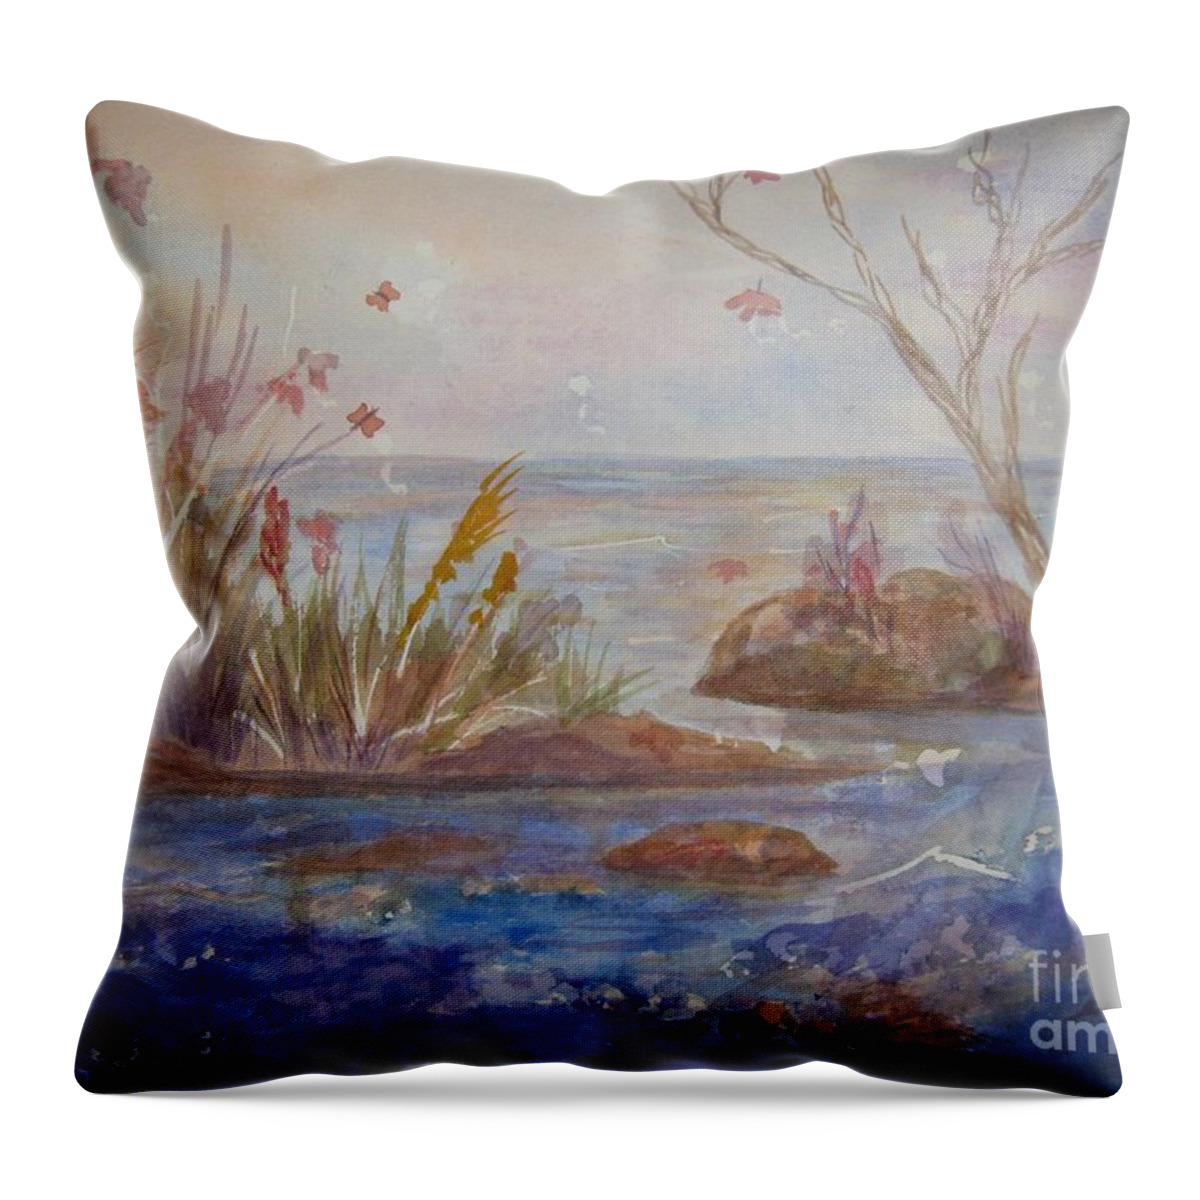 Autum Decor Throw Pillow featuring the painting Autumnal Fantasy by Ellen Levinson